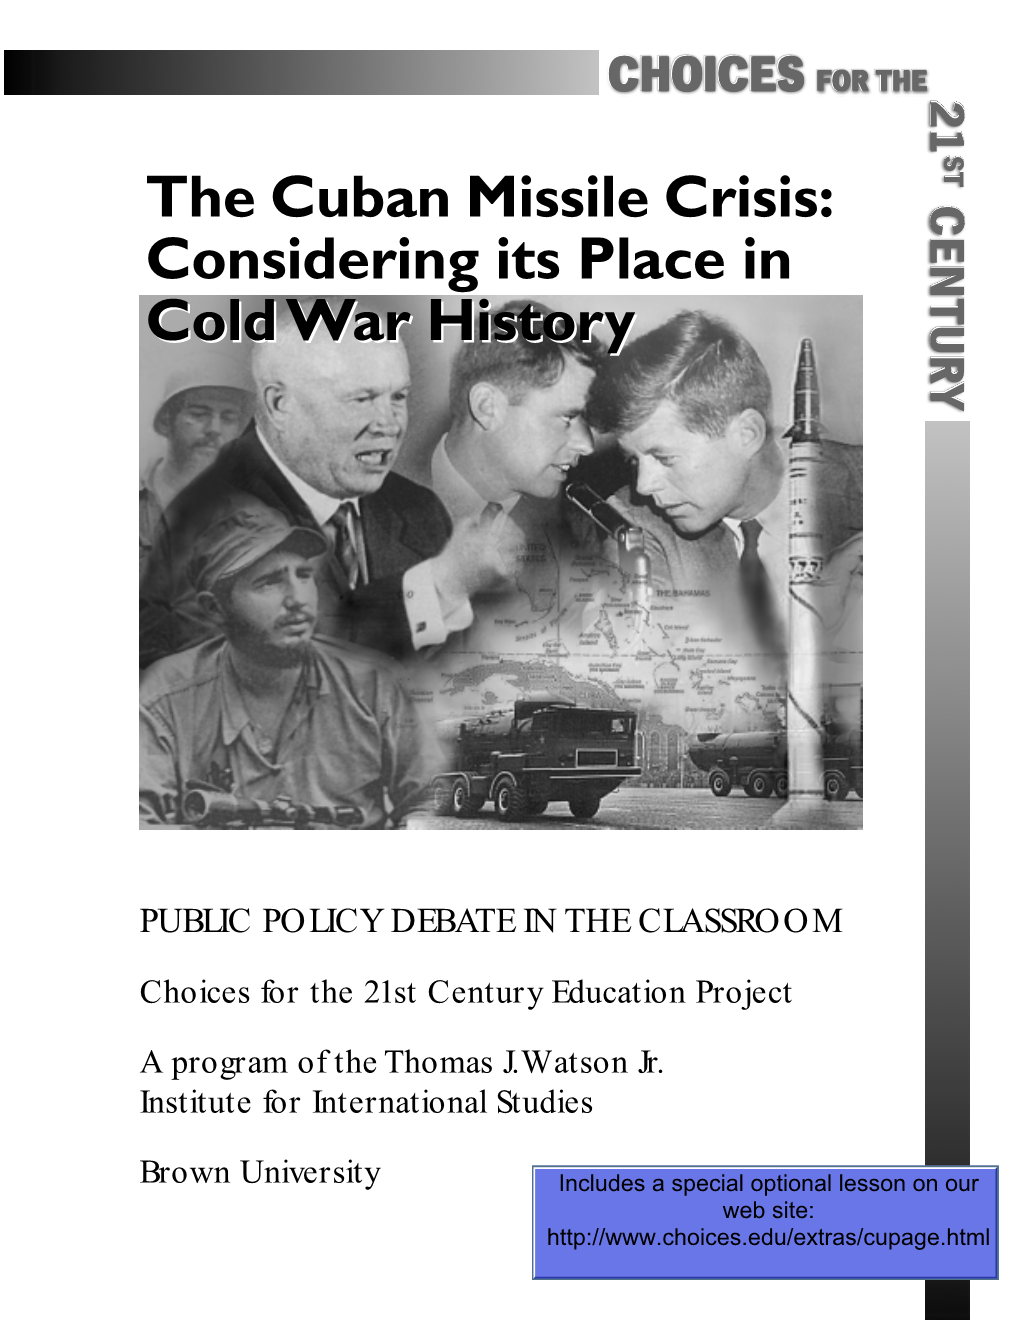 The Cuban Missile Crisis: Considering Its Place in Cold War History